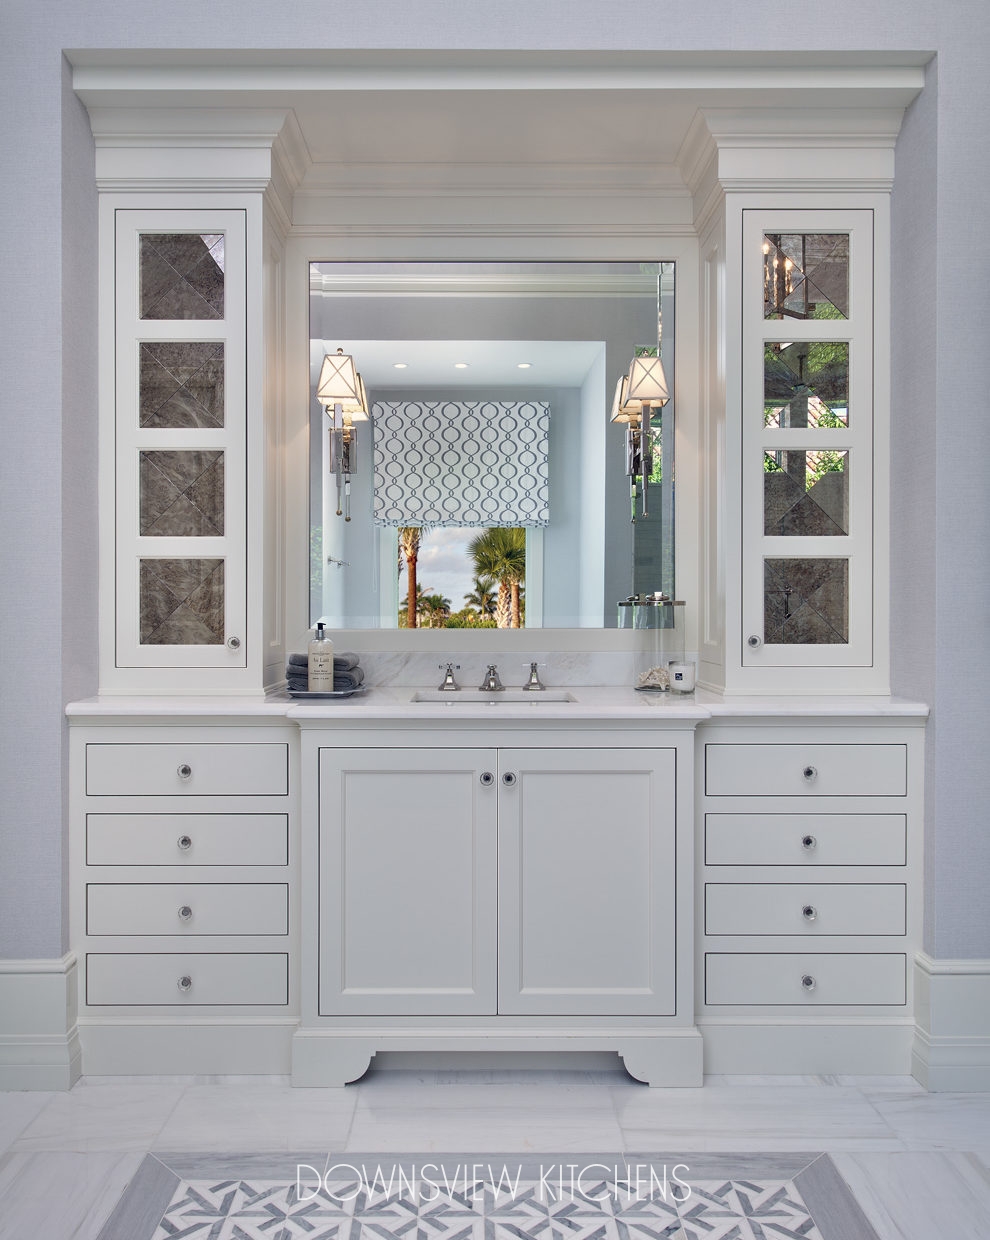 COLLECTED SERENDIPITY - Downsview Kitchens and Fine Custom Cabinetry ...